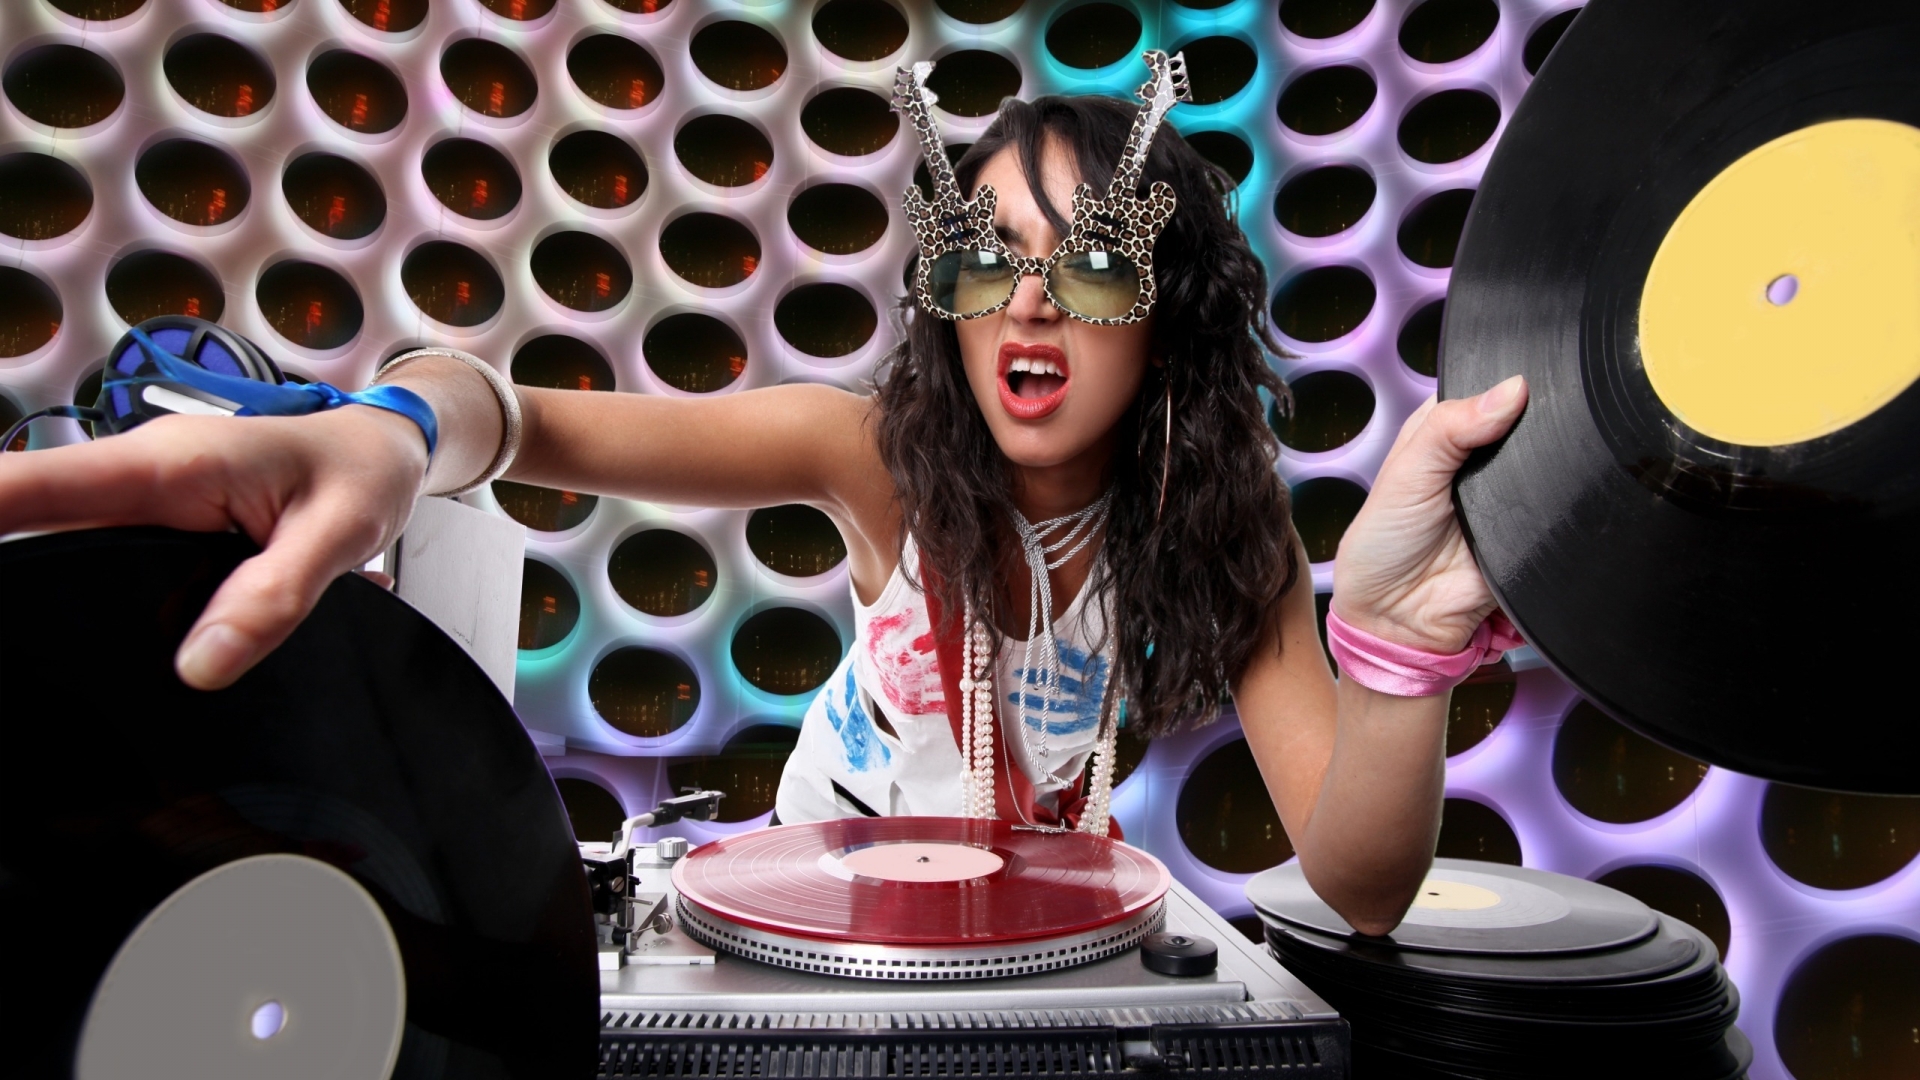 The Funniest Girl Dj for 1920 x 1080 HDTV 1080p resolution